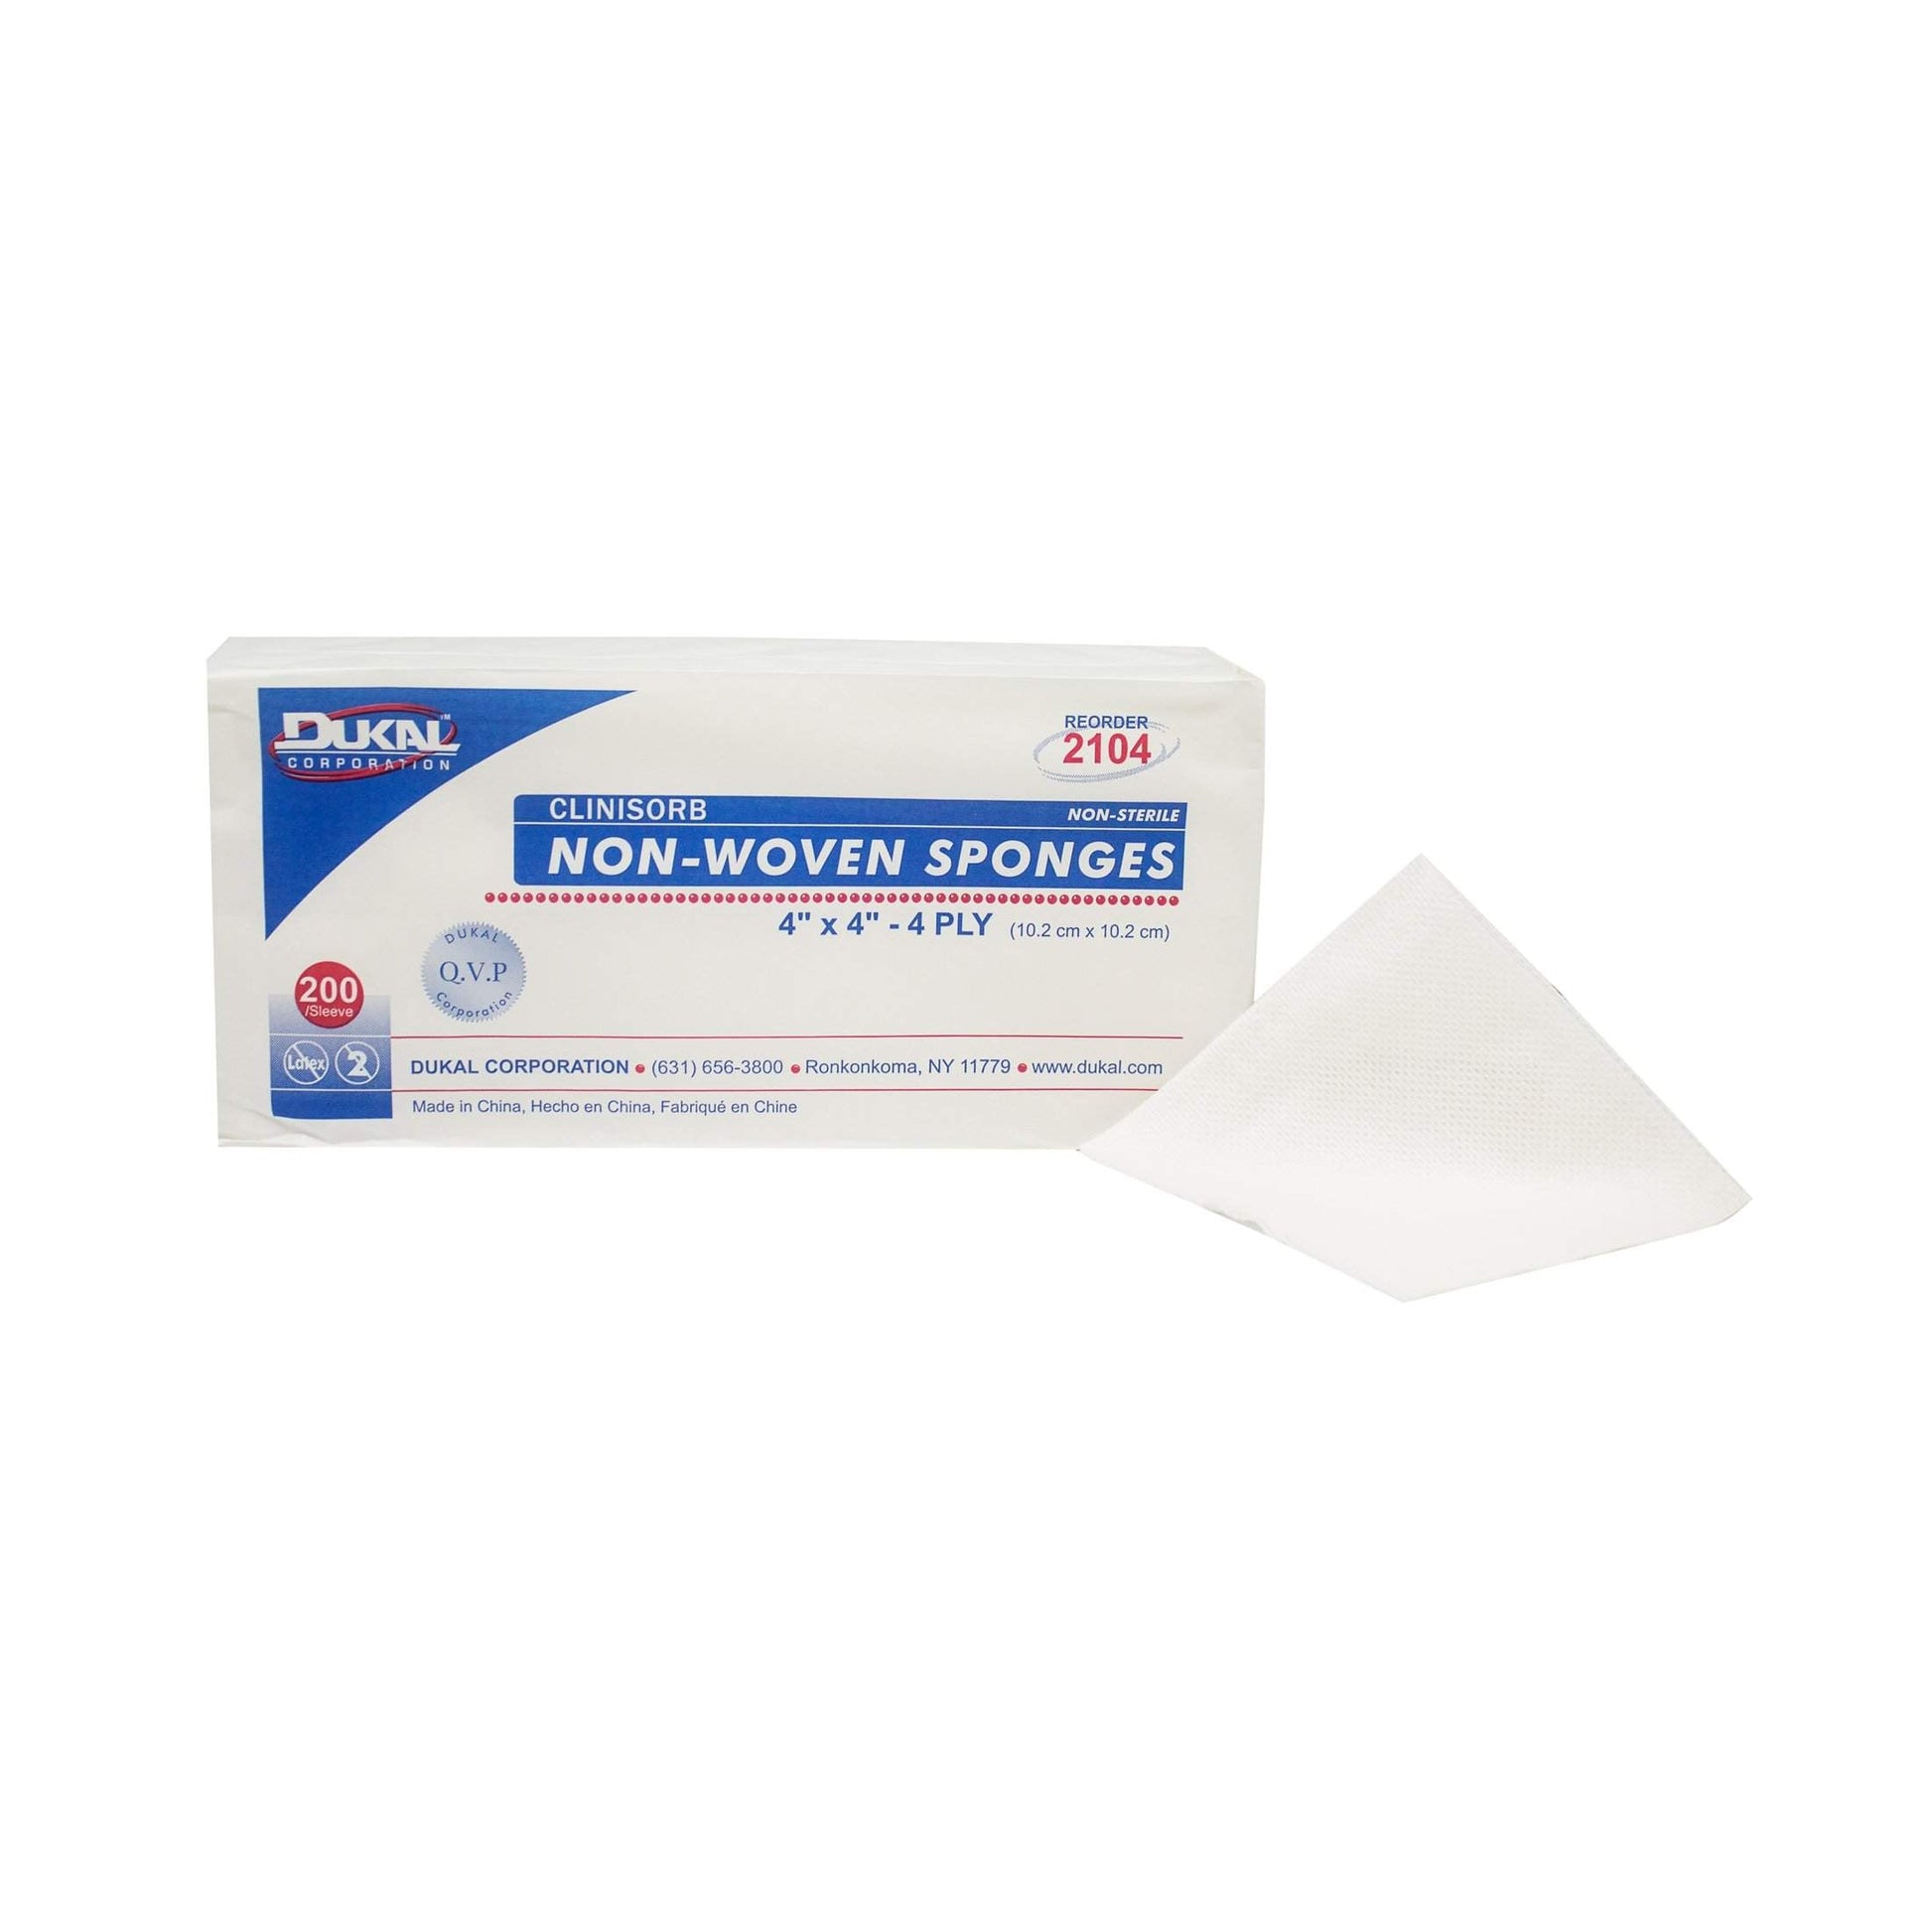 Dukal-2104 Sponge, Clinisorb, Non Woven, 4-Ply, Non Sterile, 4" x 4" (Pack of 200)-Dukal-Brand_Dukal/ Dawn Mist,Collection_Lifestyle,Dukal_Gauze,Dukal_Medical,Life_Medical